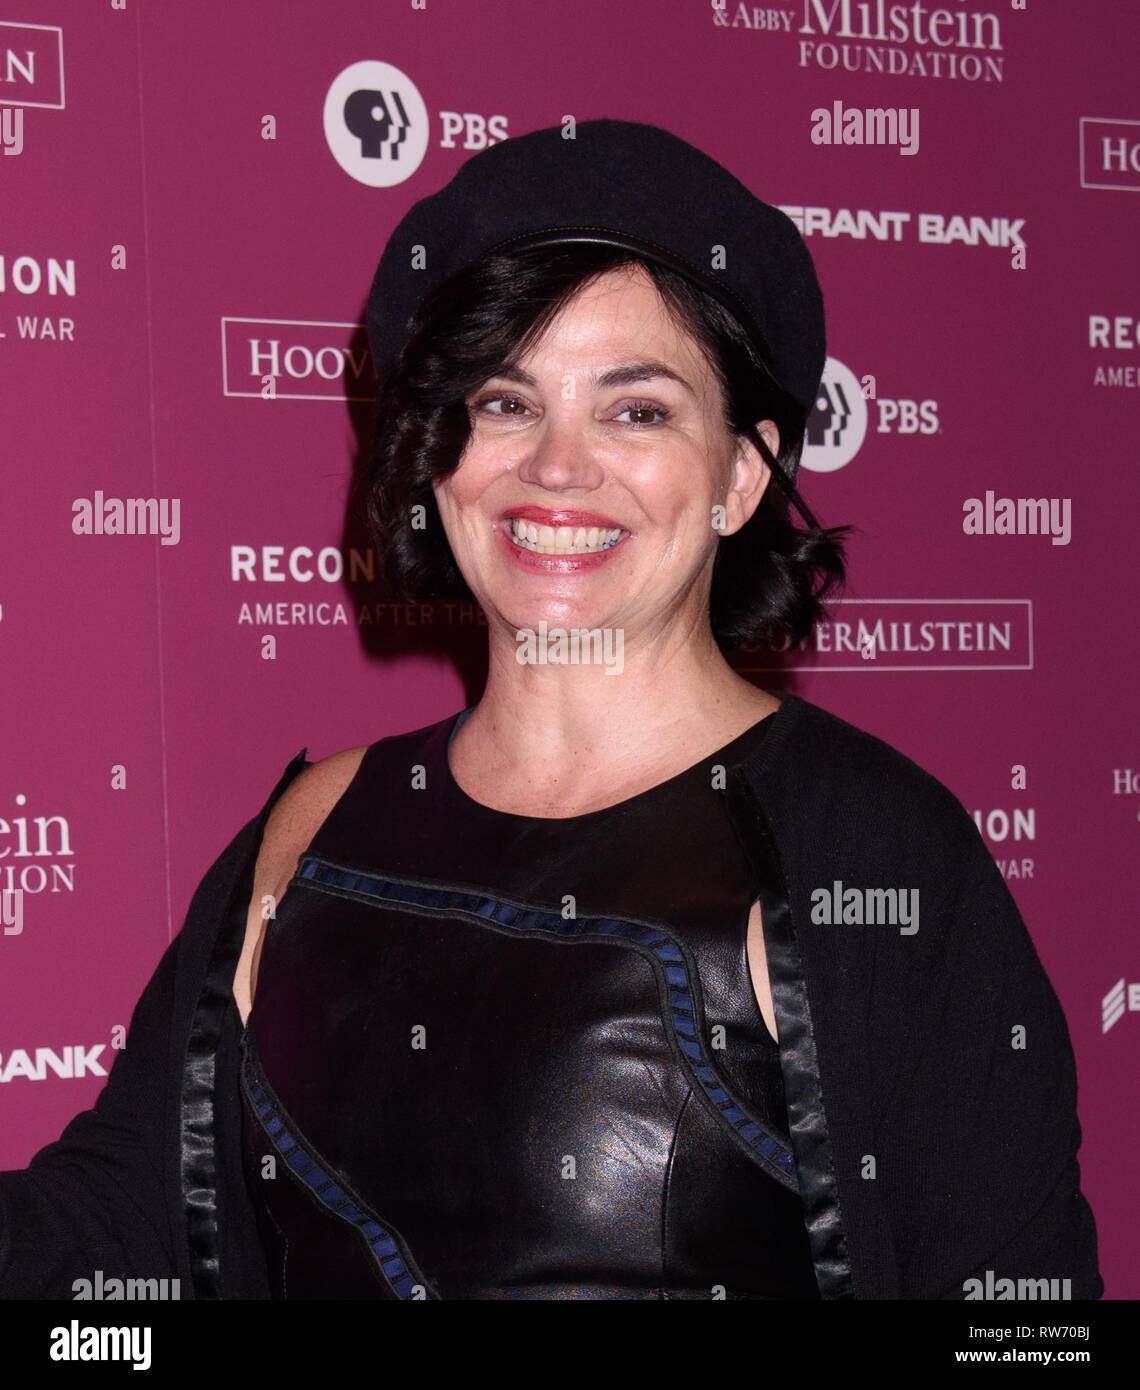 New York, NY, USA. 4th Mar, 2019. Karen Duffy at arrivals for RECONSTRUCTION: AMERICA AFTER THE CIVIL WAR Series Premiere on PBS, New-York Historical Society, New York, NY March 4, 2019. Credit: RCF/Everett Collection/Alamy Live News Stock Photo